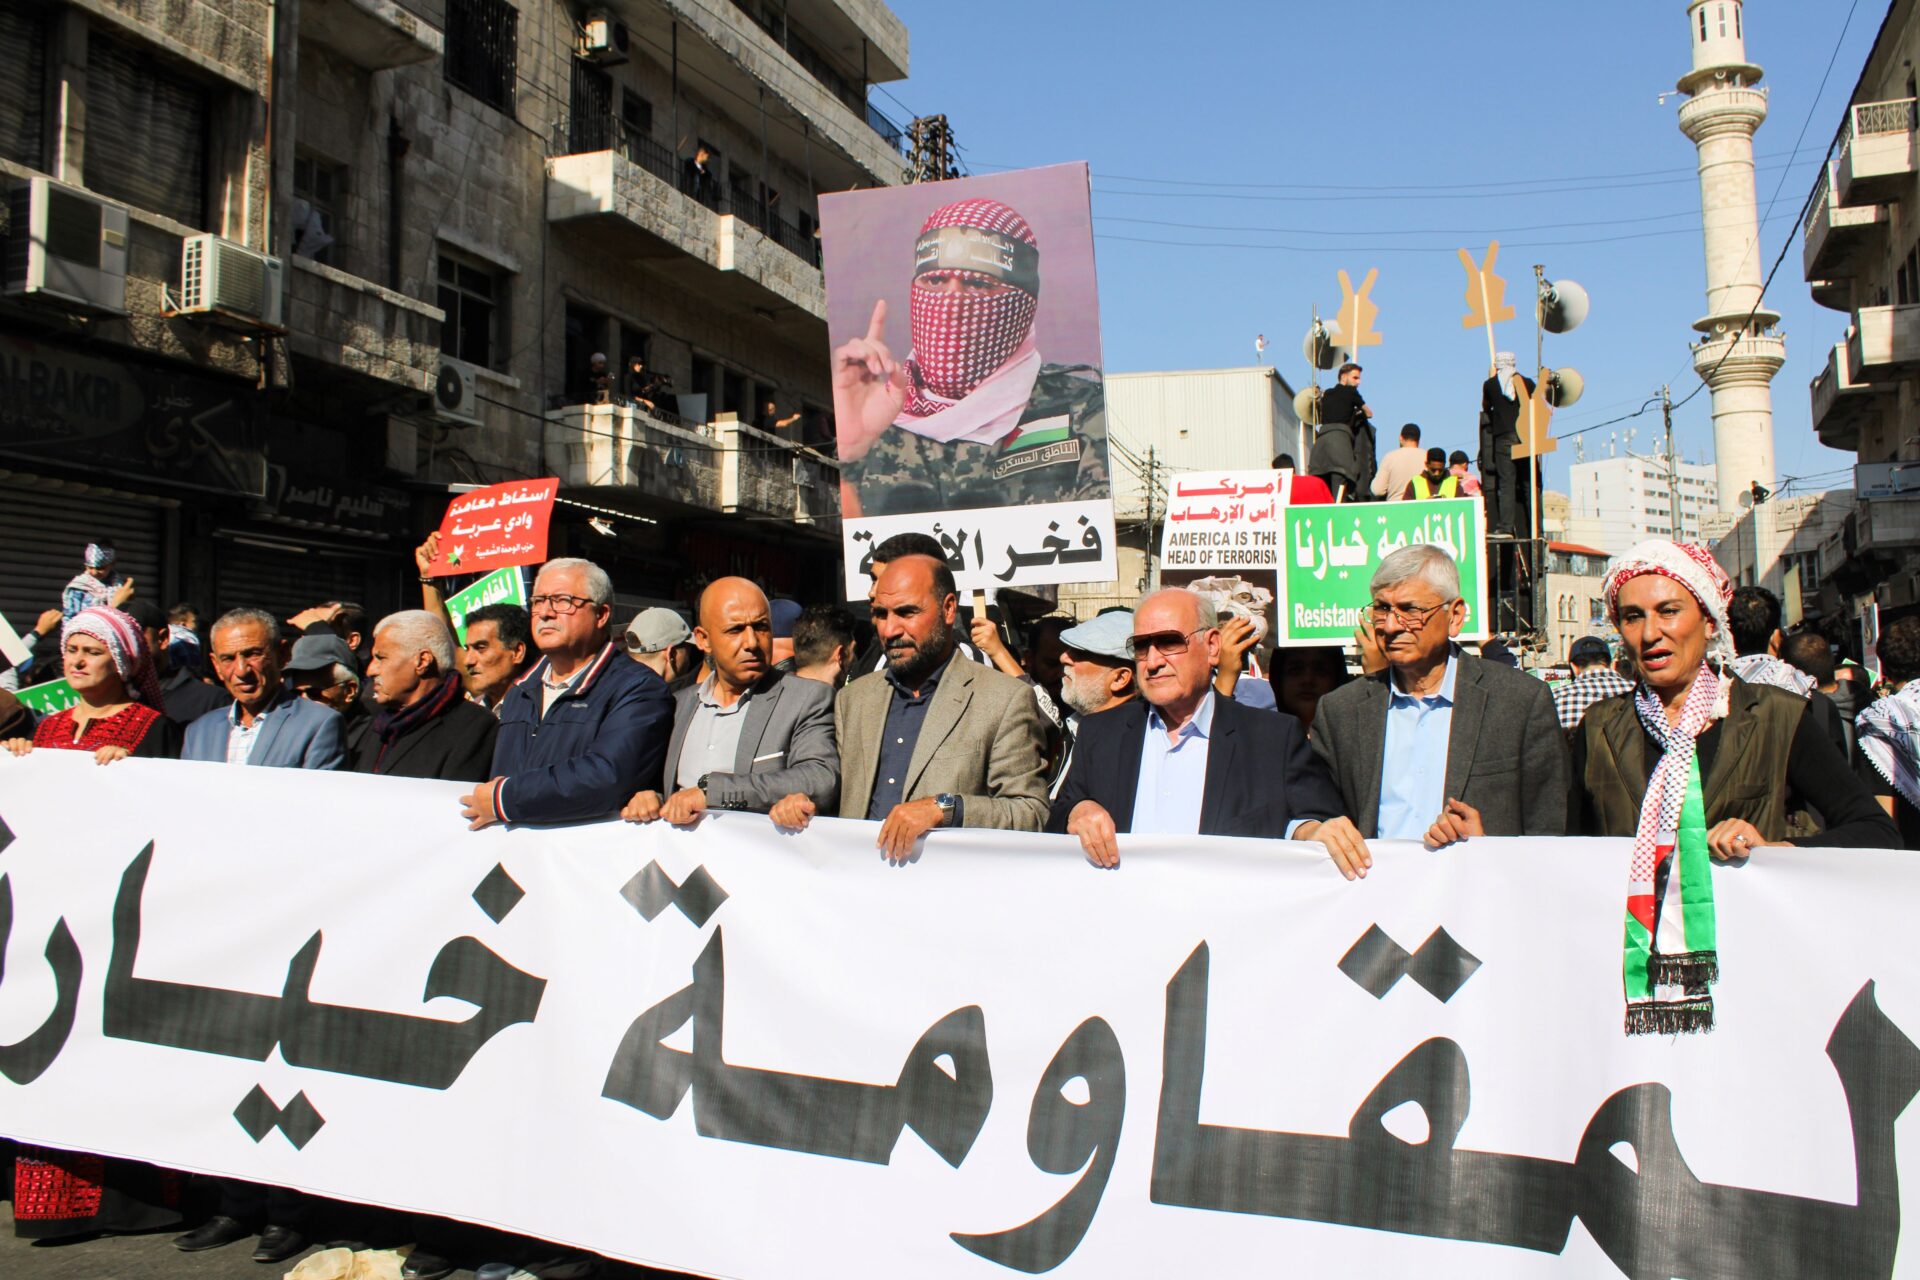 On Nov. 24, Jordanians rallied in downtown Amman in support of Hamas and other armed groups in Gaza